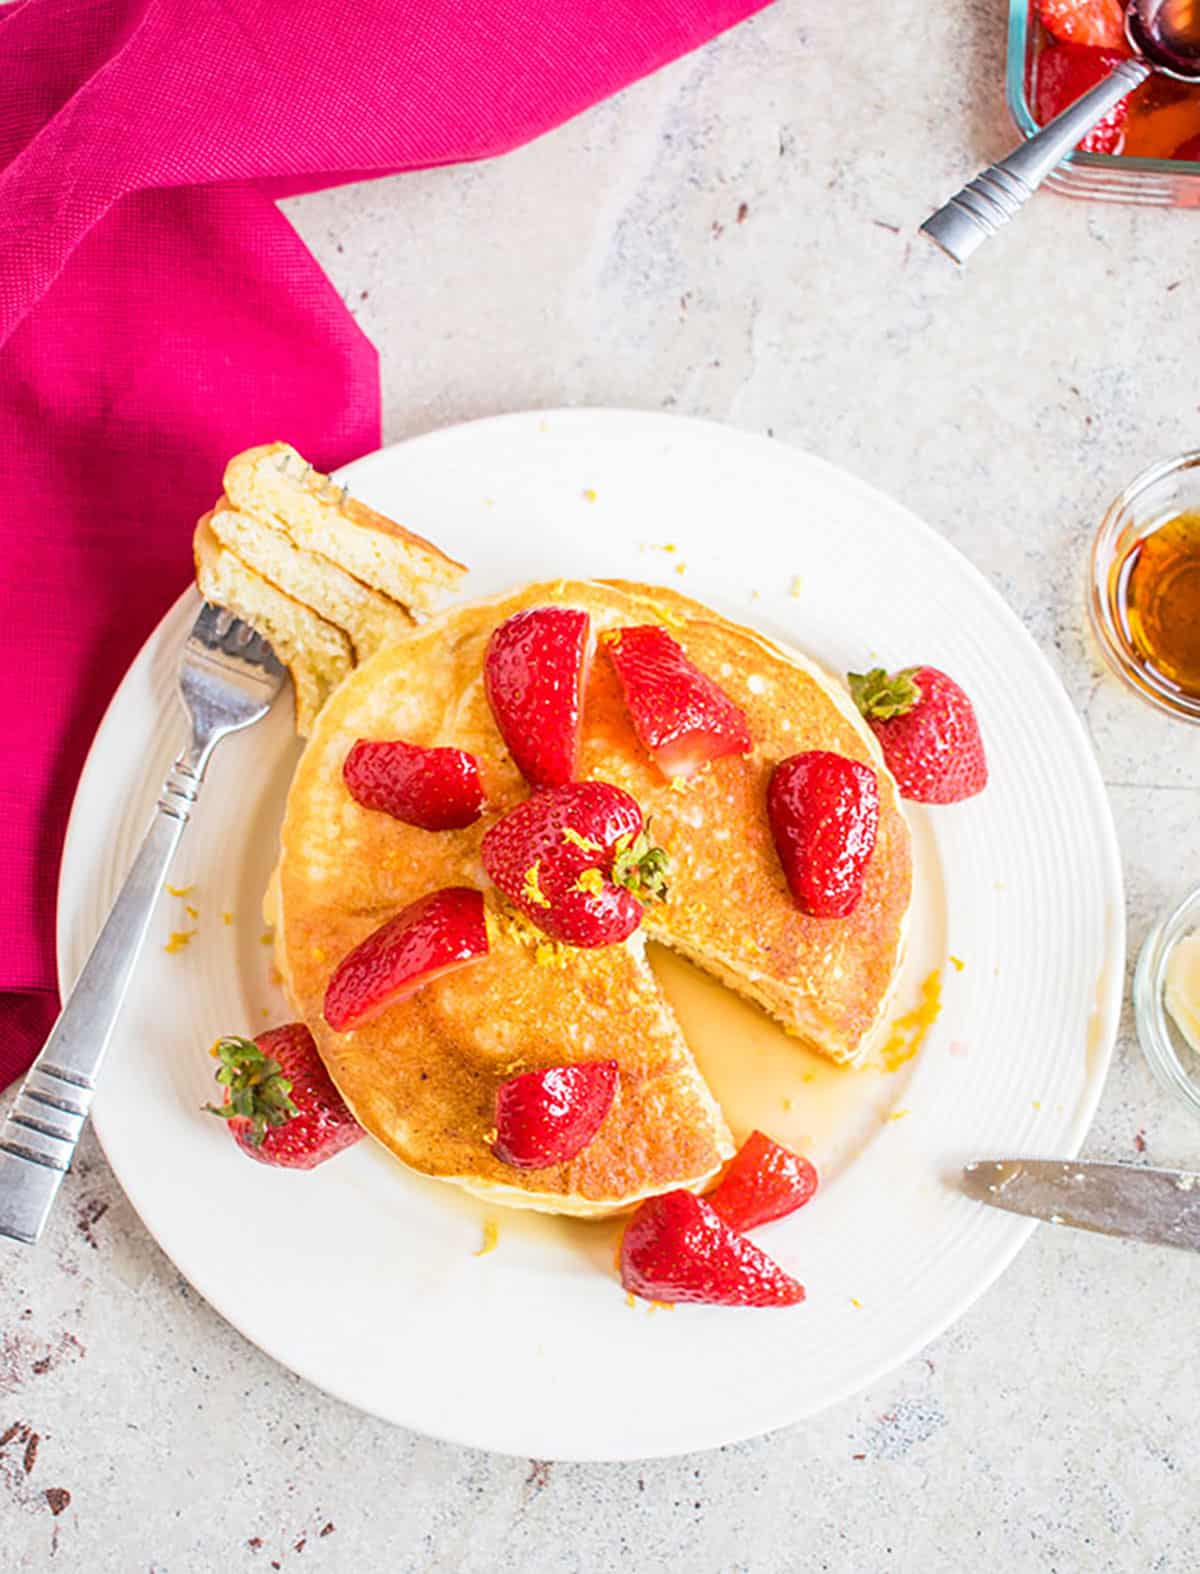 stack of pancakes on a plate garnished with strawberries